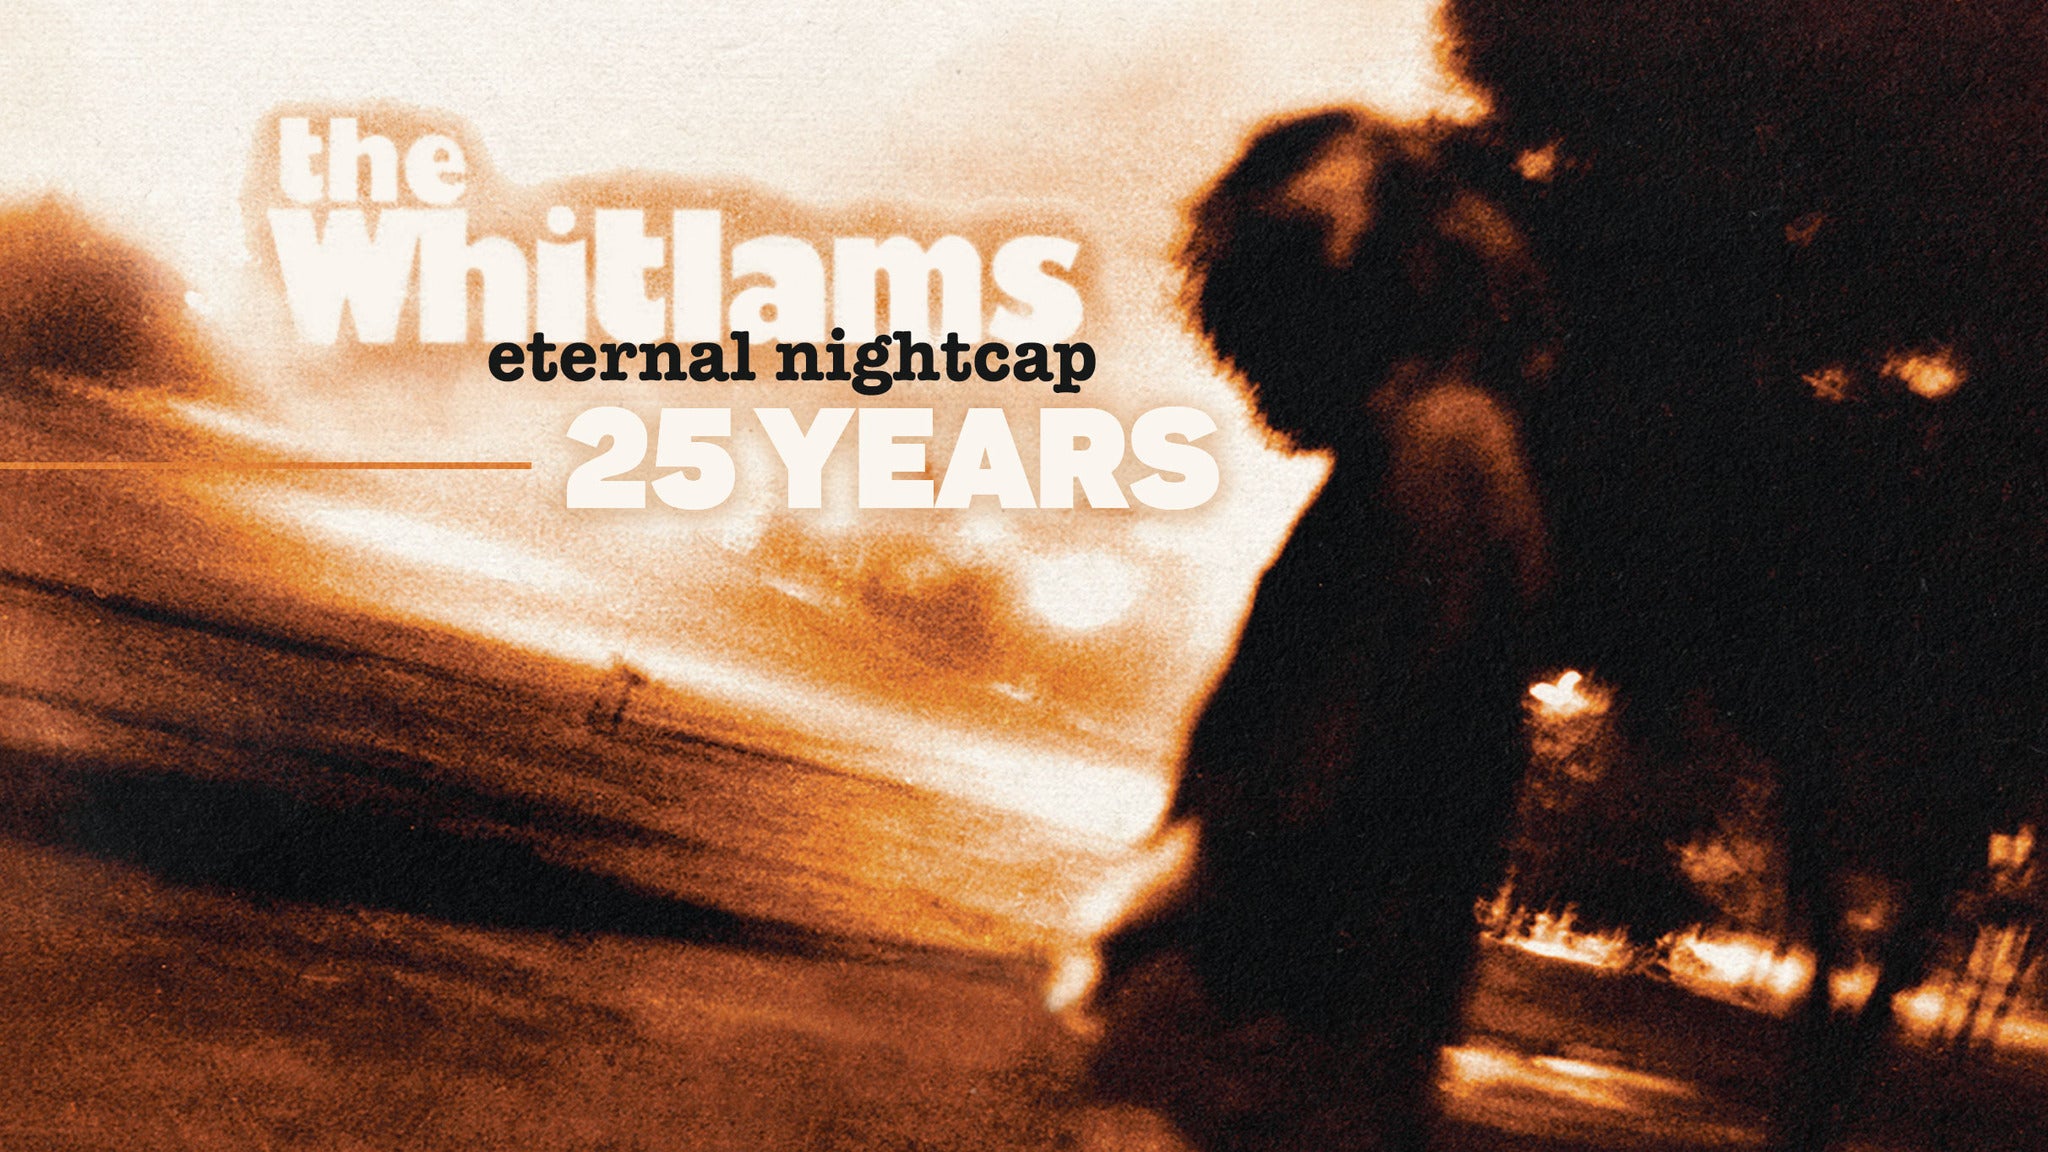 Image used with permission from Ticketmaster | The Whitlams - Eternal Nightcap 25 years Concert tickets